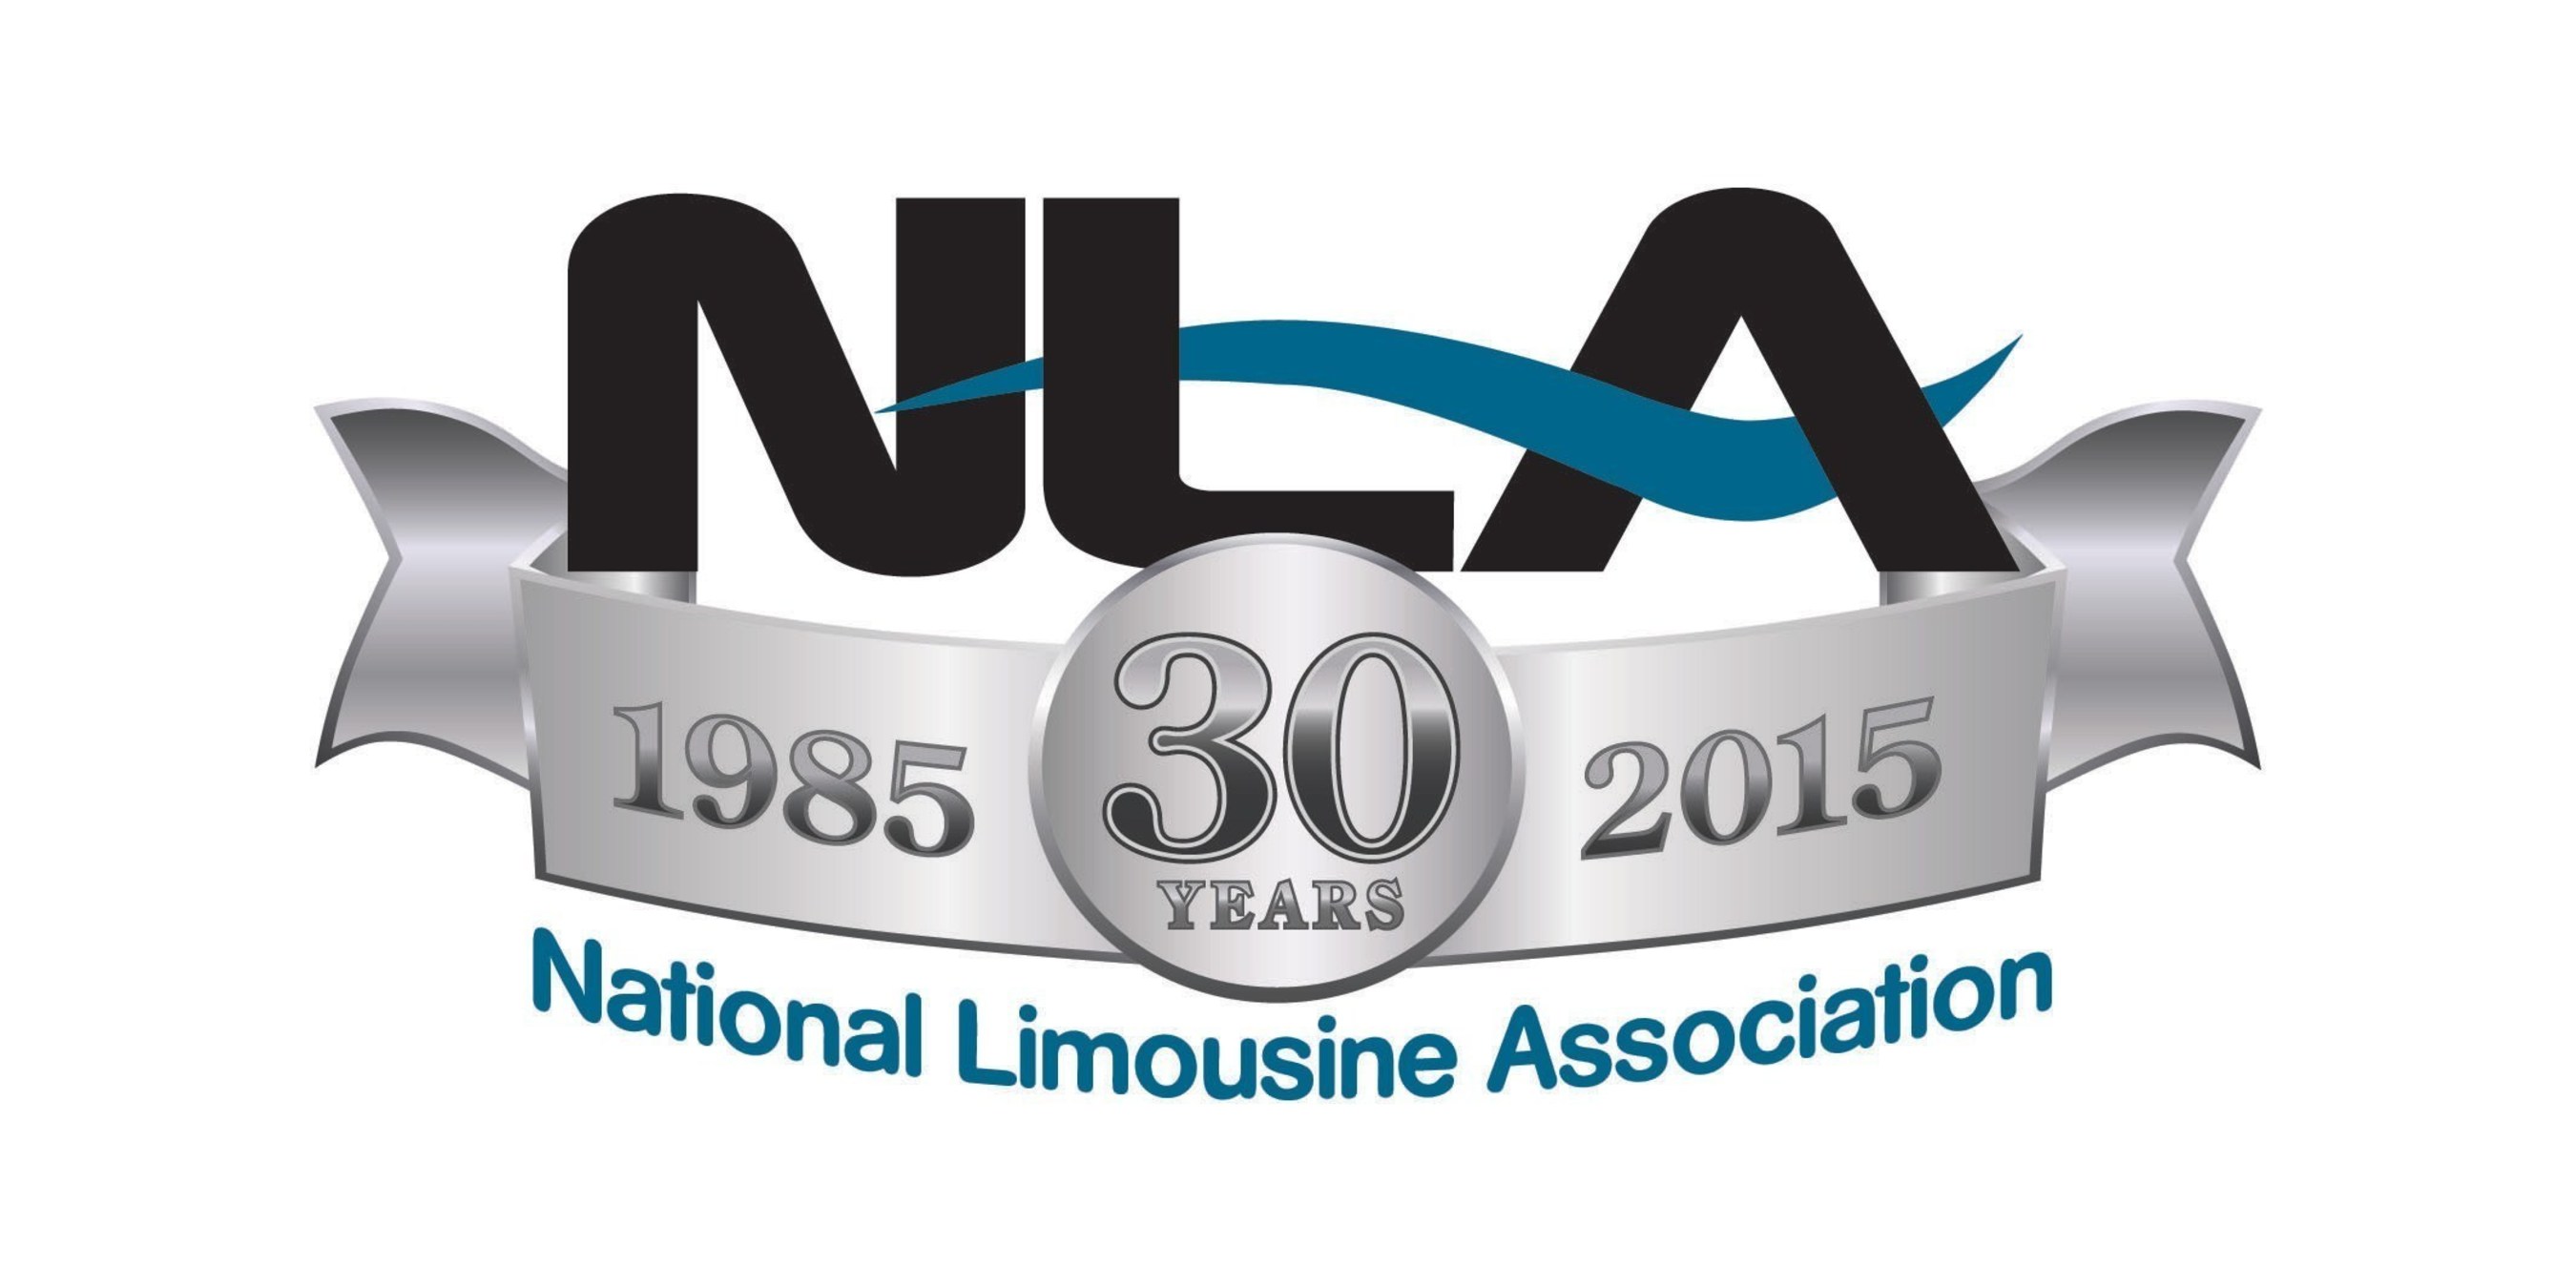 National Limousine Association, celebrating 30 years as the voice of the prearranged car service industry worldwide